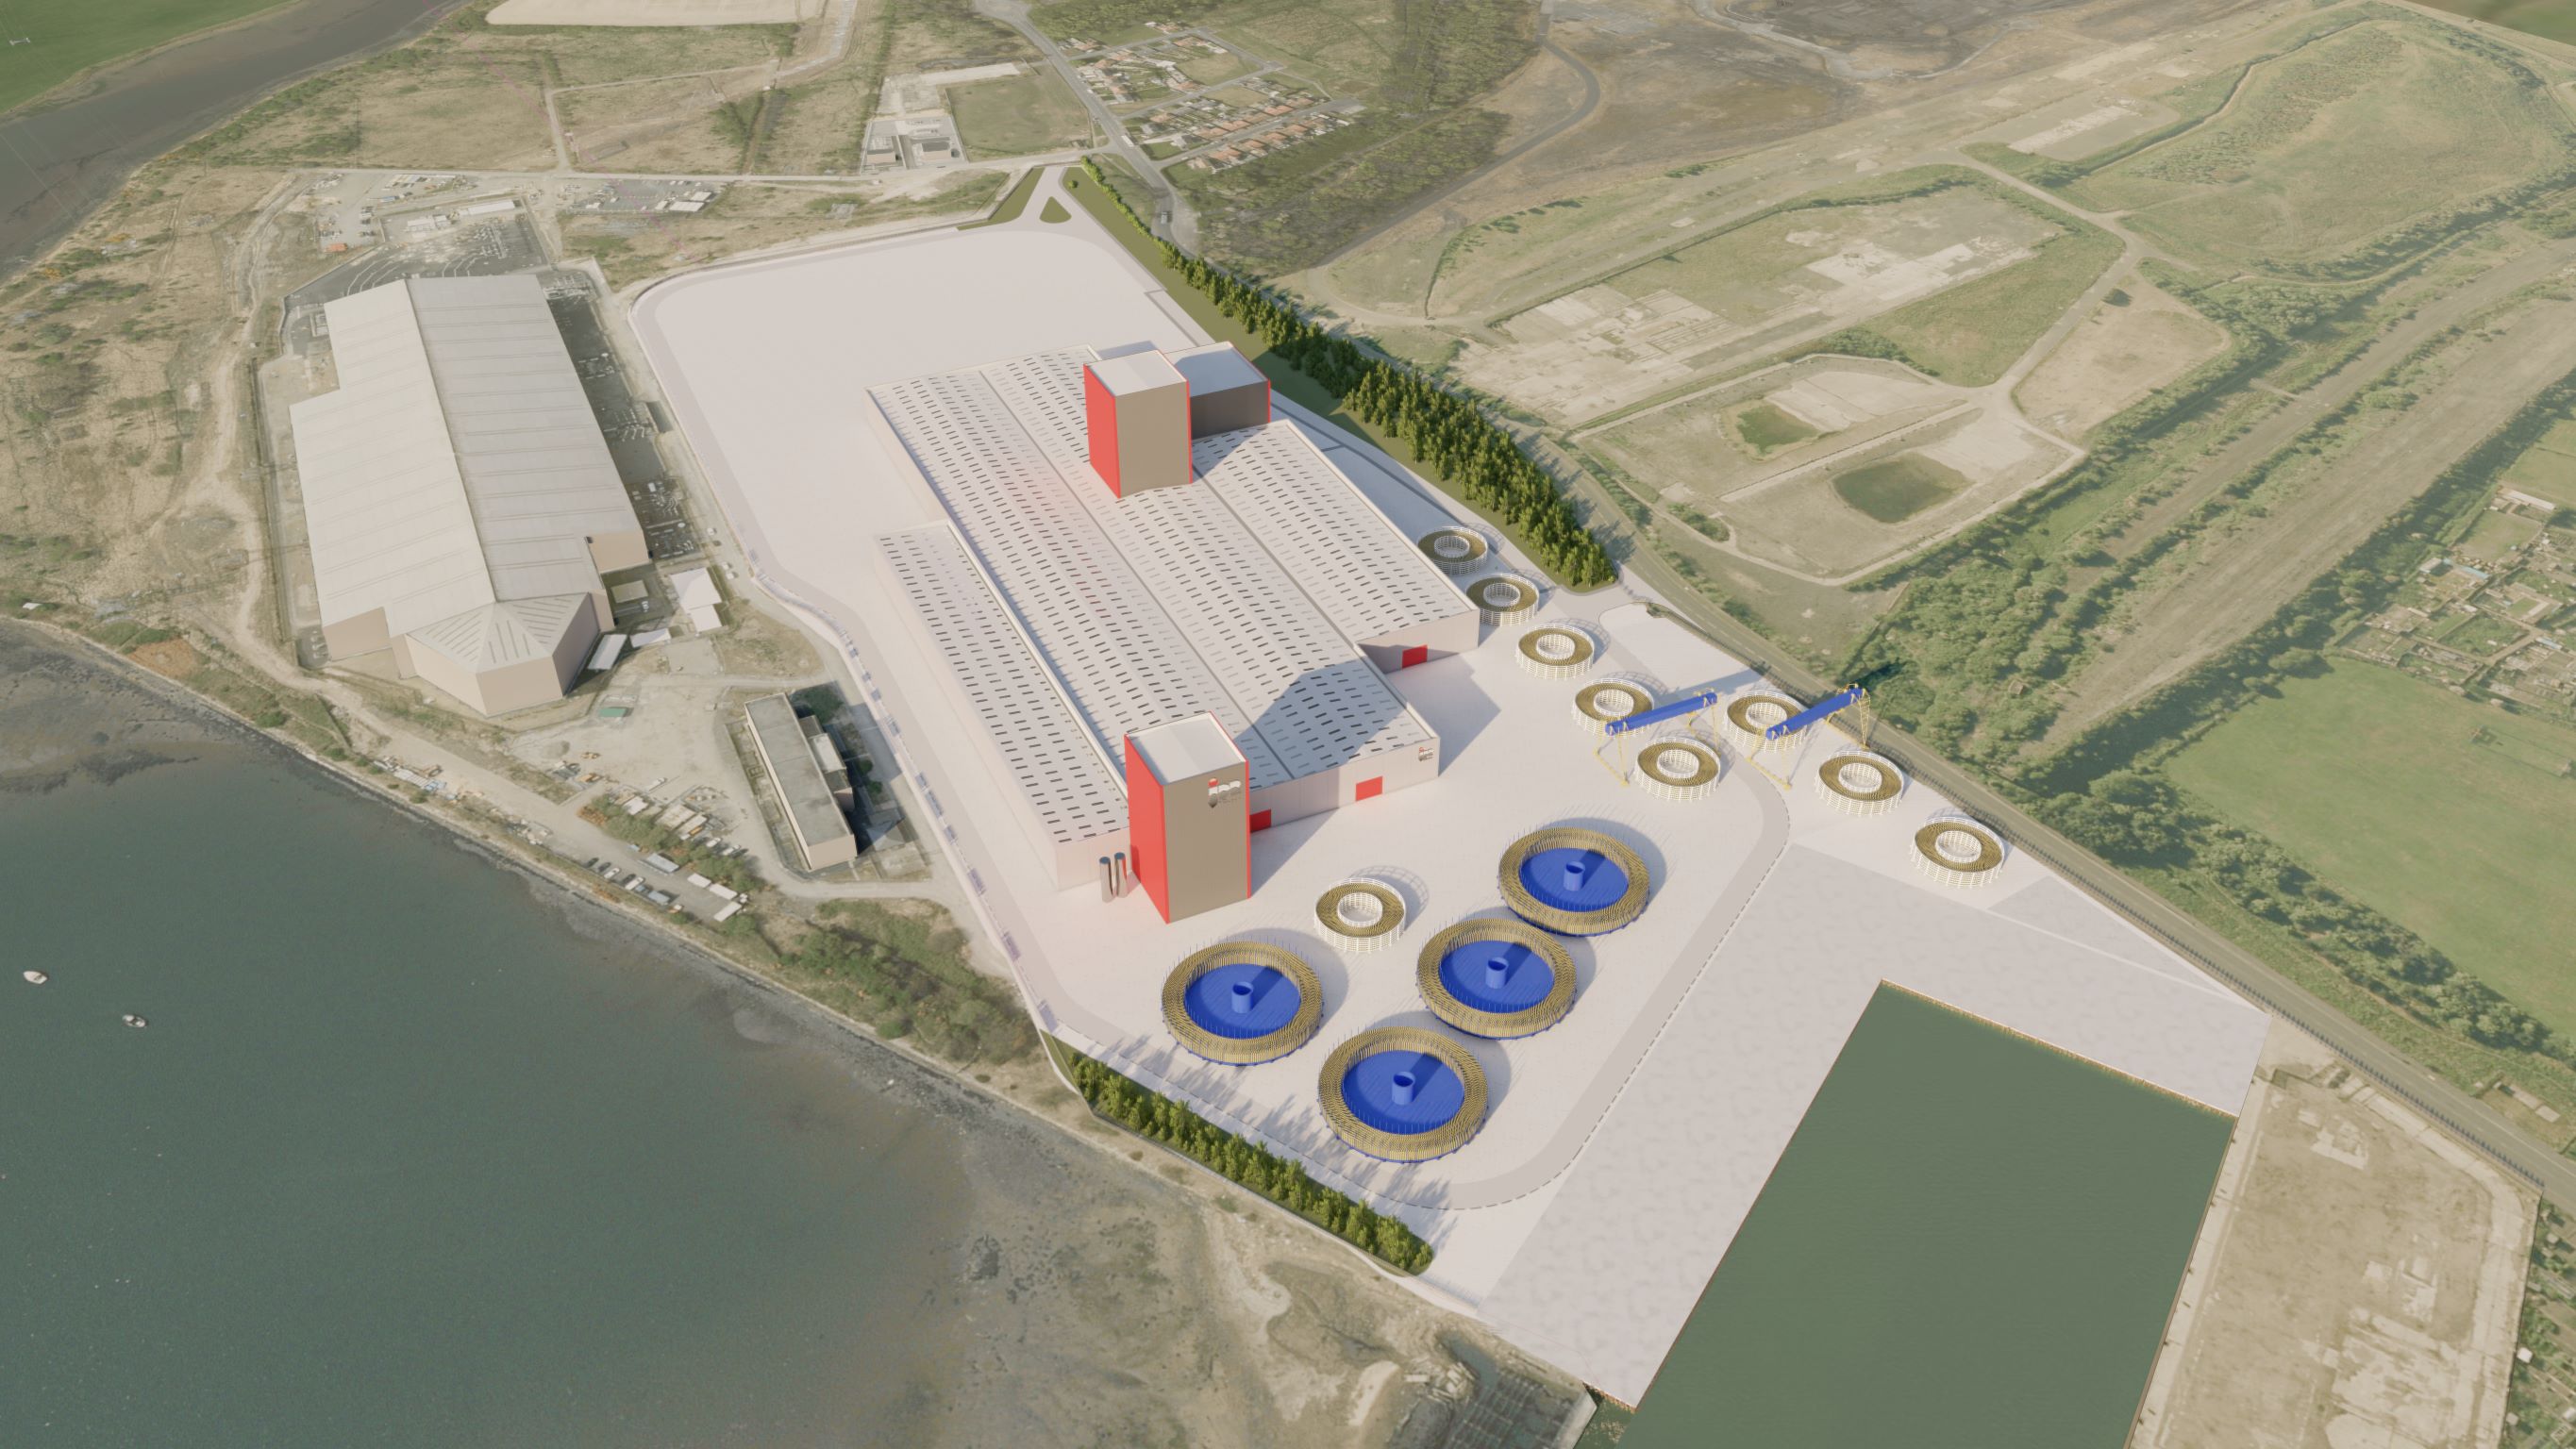 JDR reveals plan for new subsea cable manufacturing facility